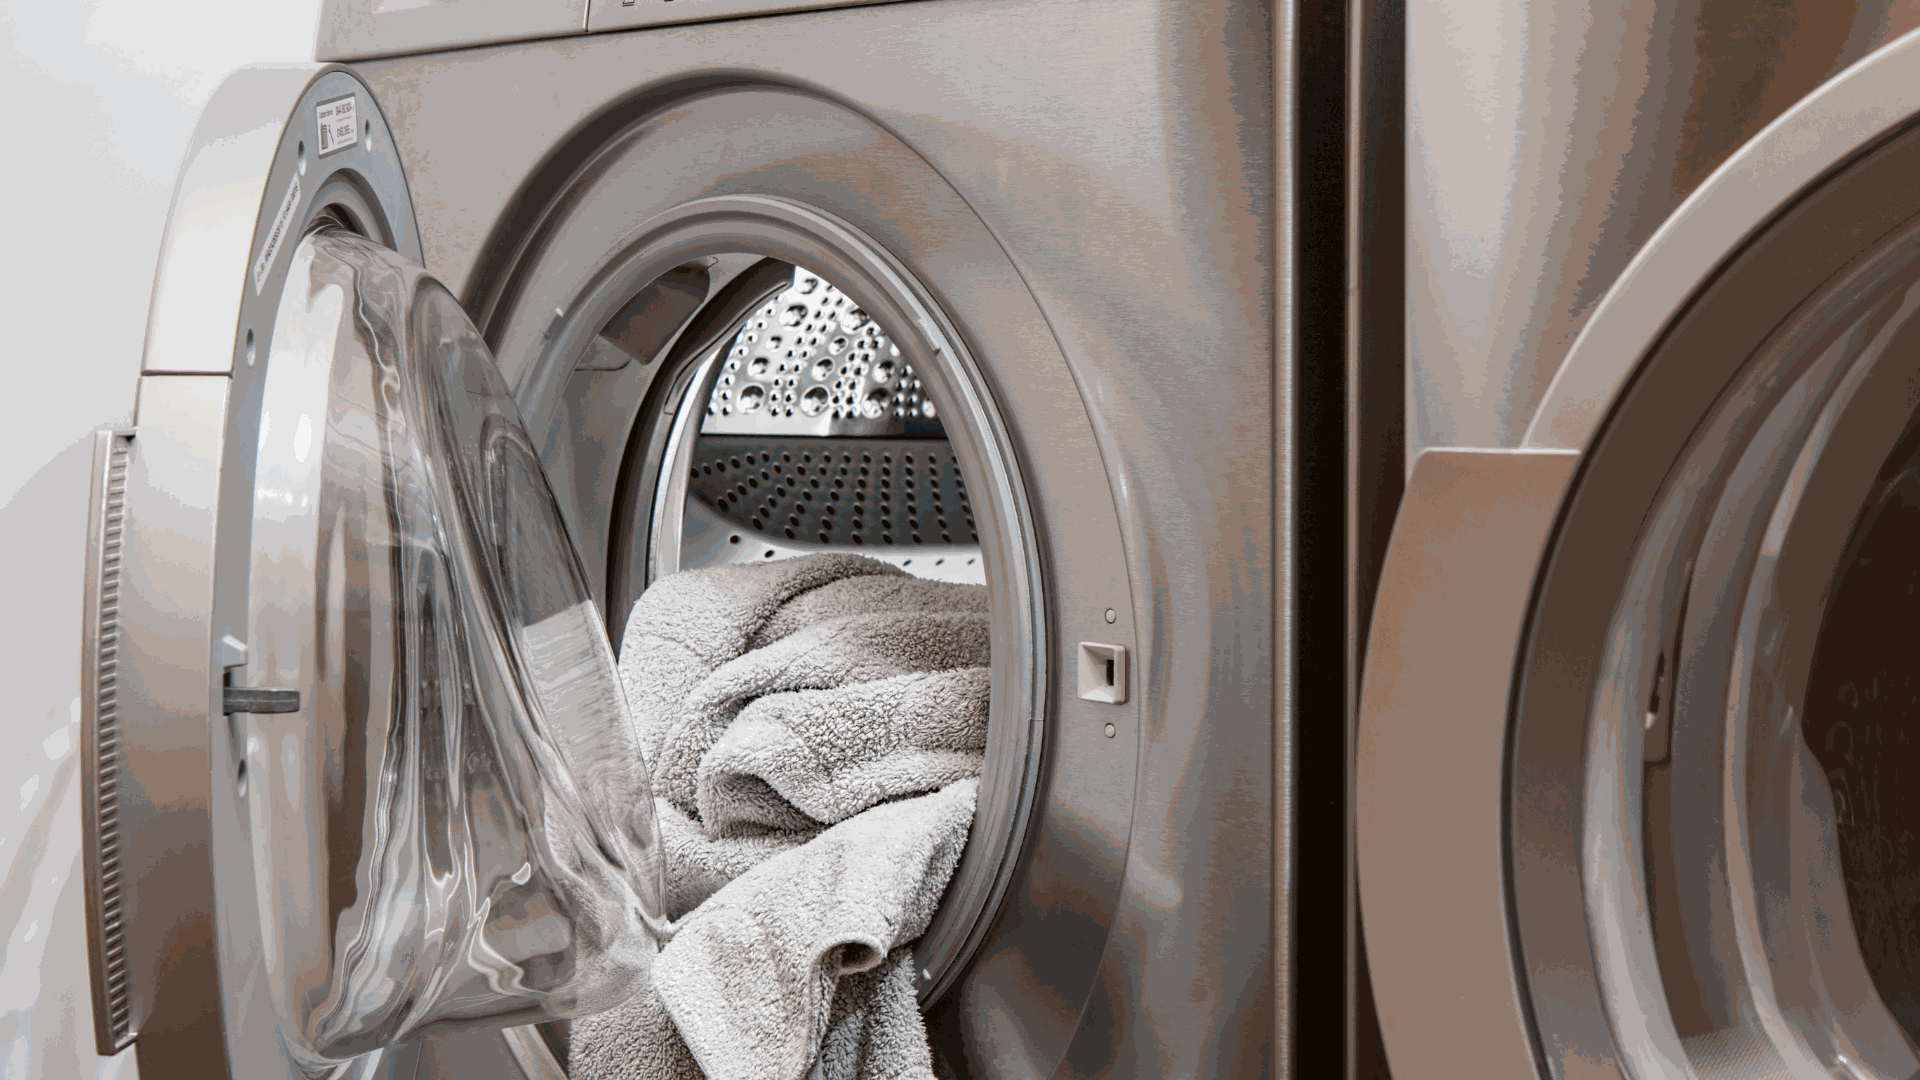 Hotel Linens ready for Washing Machine Laundering